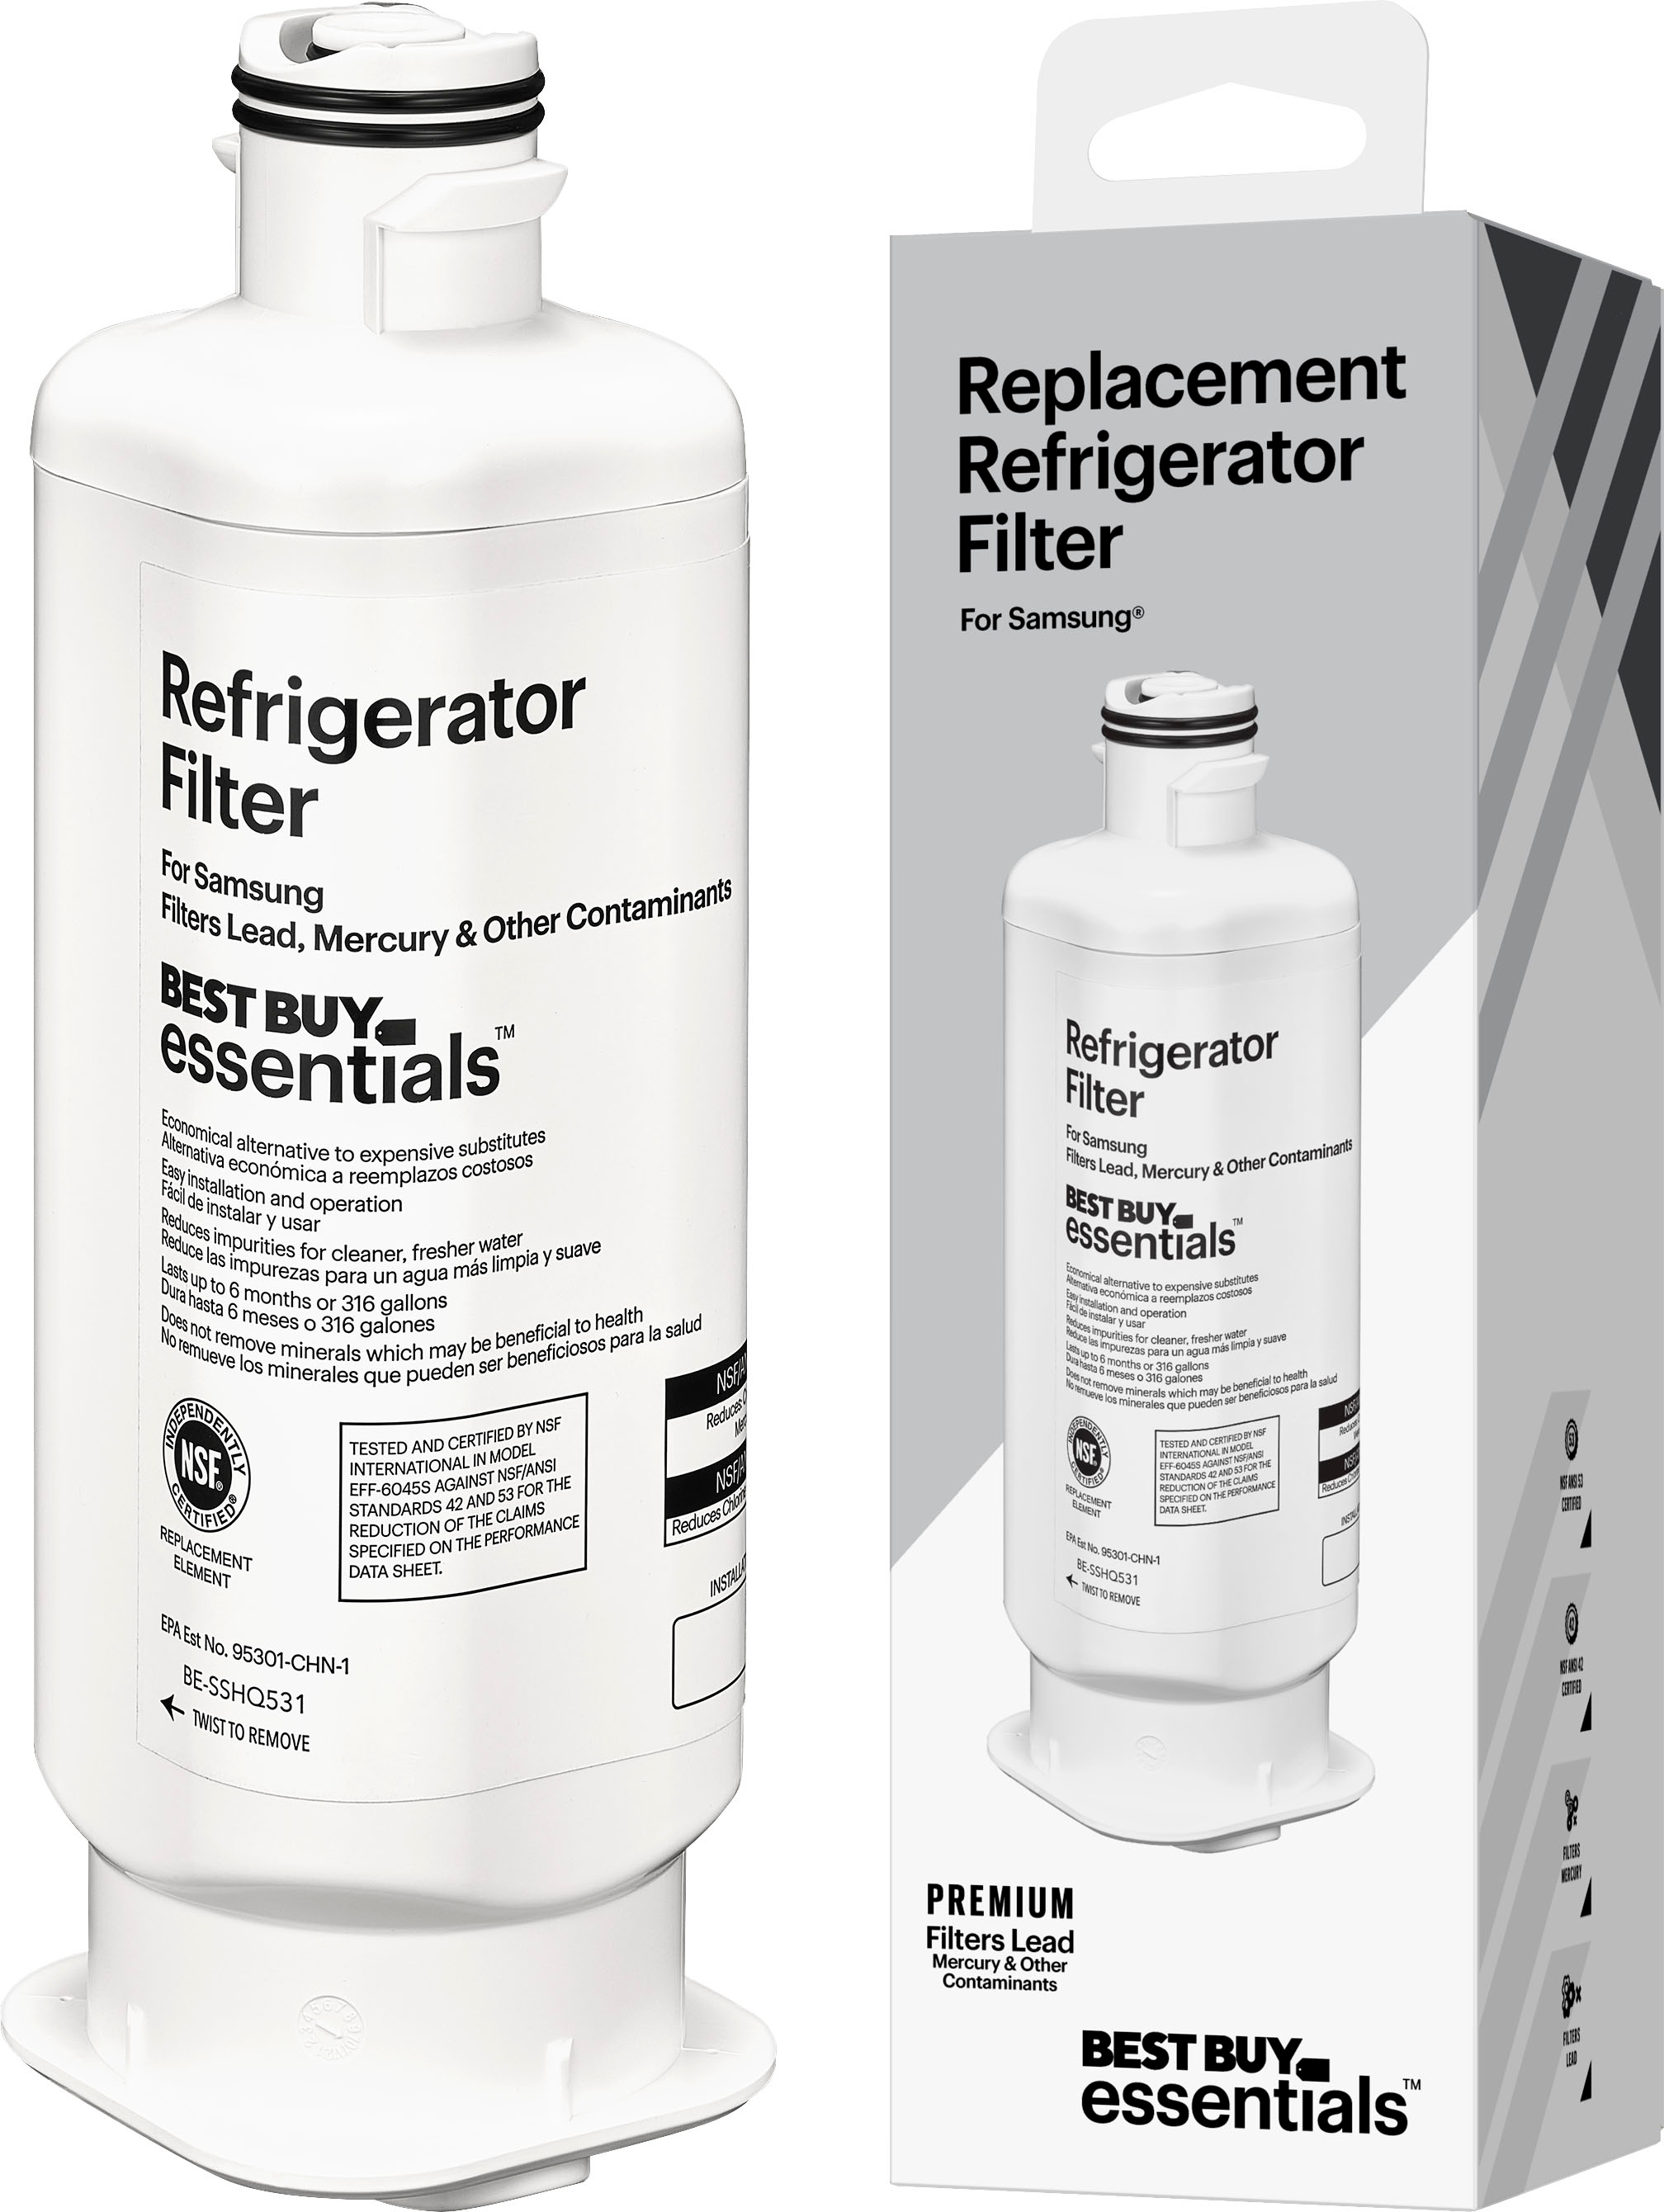 Best Buy Essentials - NSF 42/53 Water Filter Replacement for Select Whirlpool, KitchenAid and Sears/Kenmore Refrigerators - White